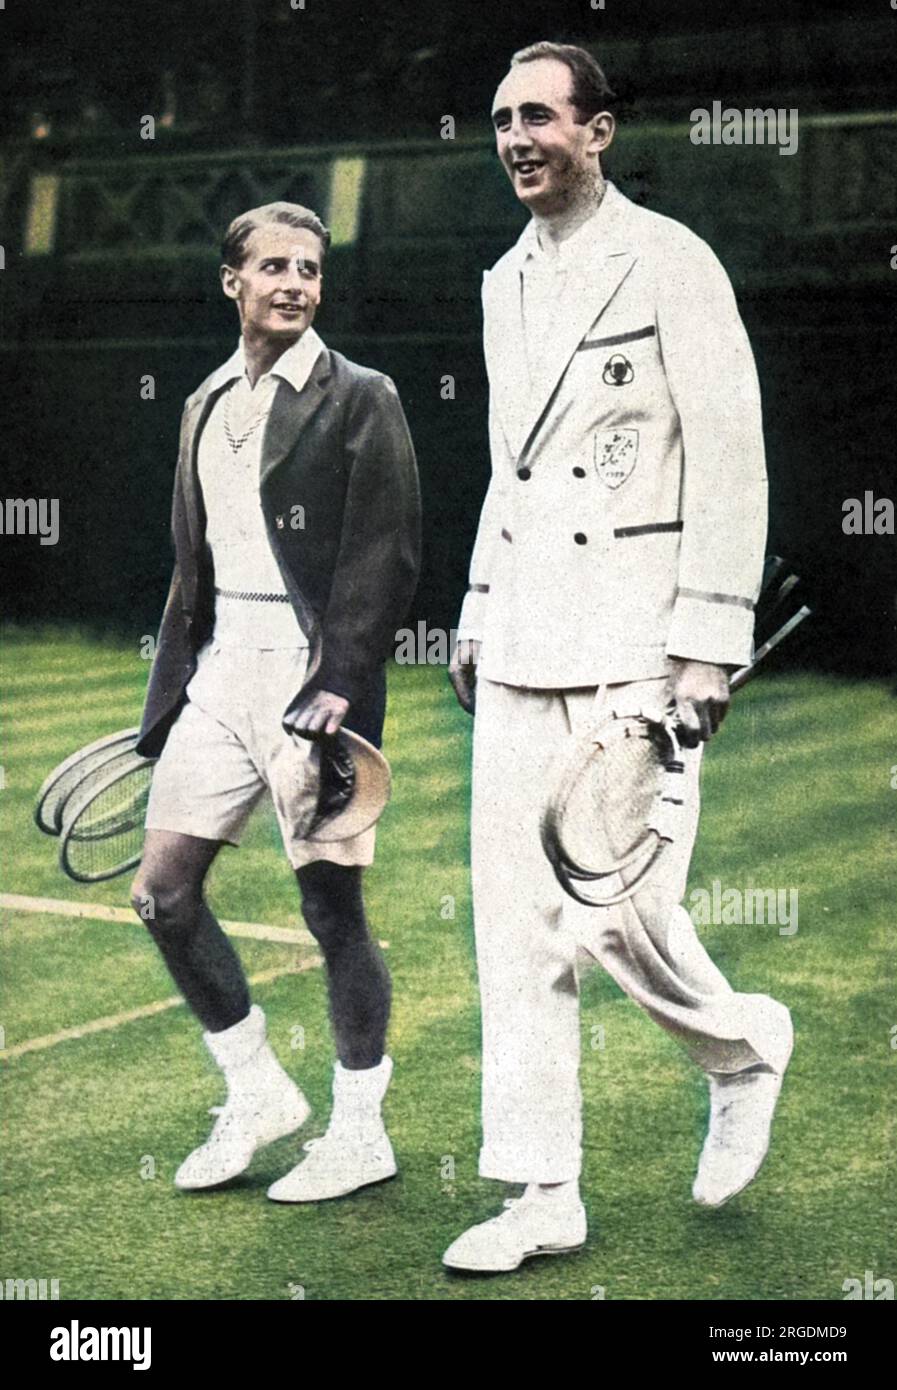 Henry Wilfred 'Bunny' Austin (1906-2000), looks up at the towering frame of his 6 ft 7 inche opponent, Lyttelton Rogers of Ireland, coming out to play the first match at Wimbledon in the Coronation Year Lawn Tennis Championships.  Austin won the four-set match, 3-6, 8-6, 6-1, 6-2. Stock Photo